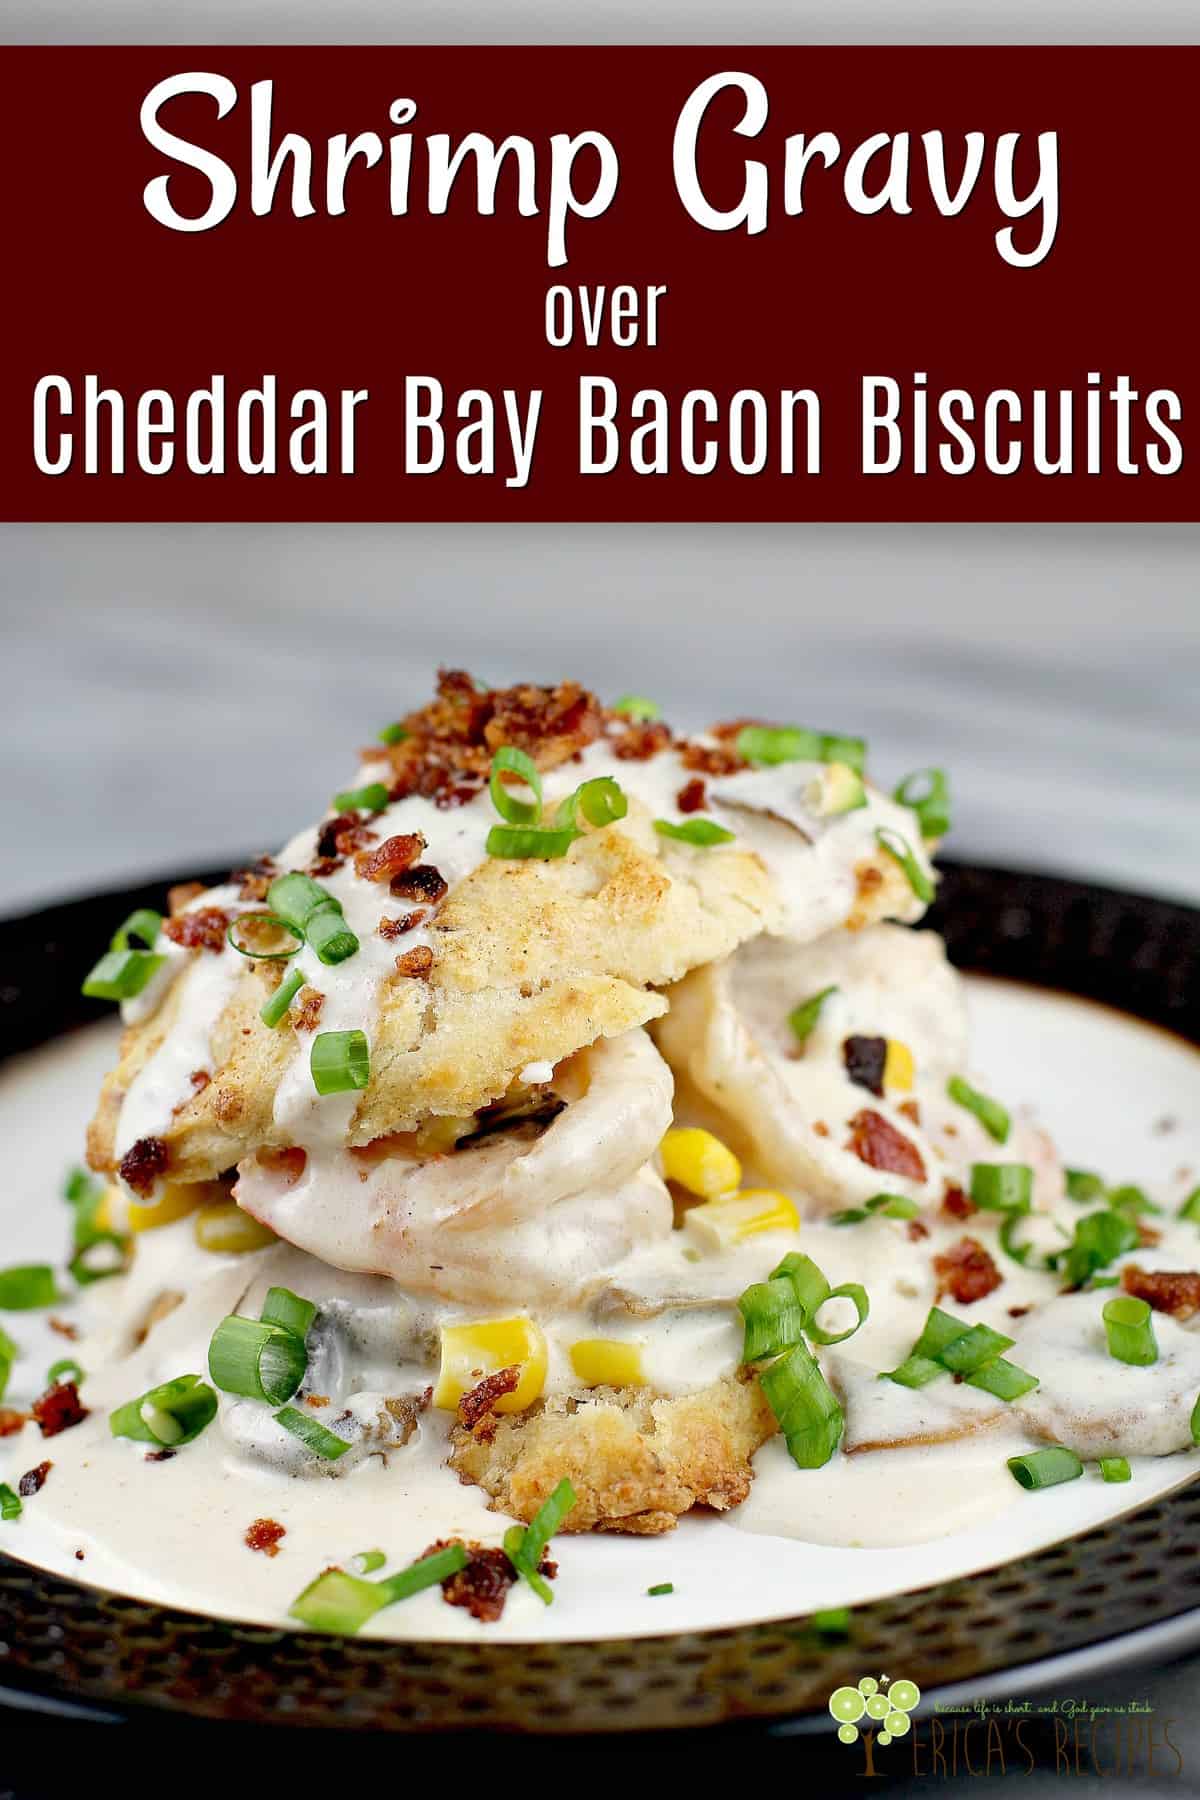 This epic recipe for Shrimp Gravy over Cheddar Bay Bacon Biscuits is as delicious as it is fun to make. Cream gravy with shrimp, over copycat Red Lobster biscuits made even better with bacon. Make this biscuits and gravy recipe for a delicious, creative seafood recipe with a low-country vibe. #breakfast #redlobstercopycat #biscuitsandgravy #cheddarbaybiscuits #shrimpgravy #food #seafoodrecipe #shrimprecipe #cheddarbaconbiscuits